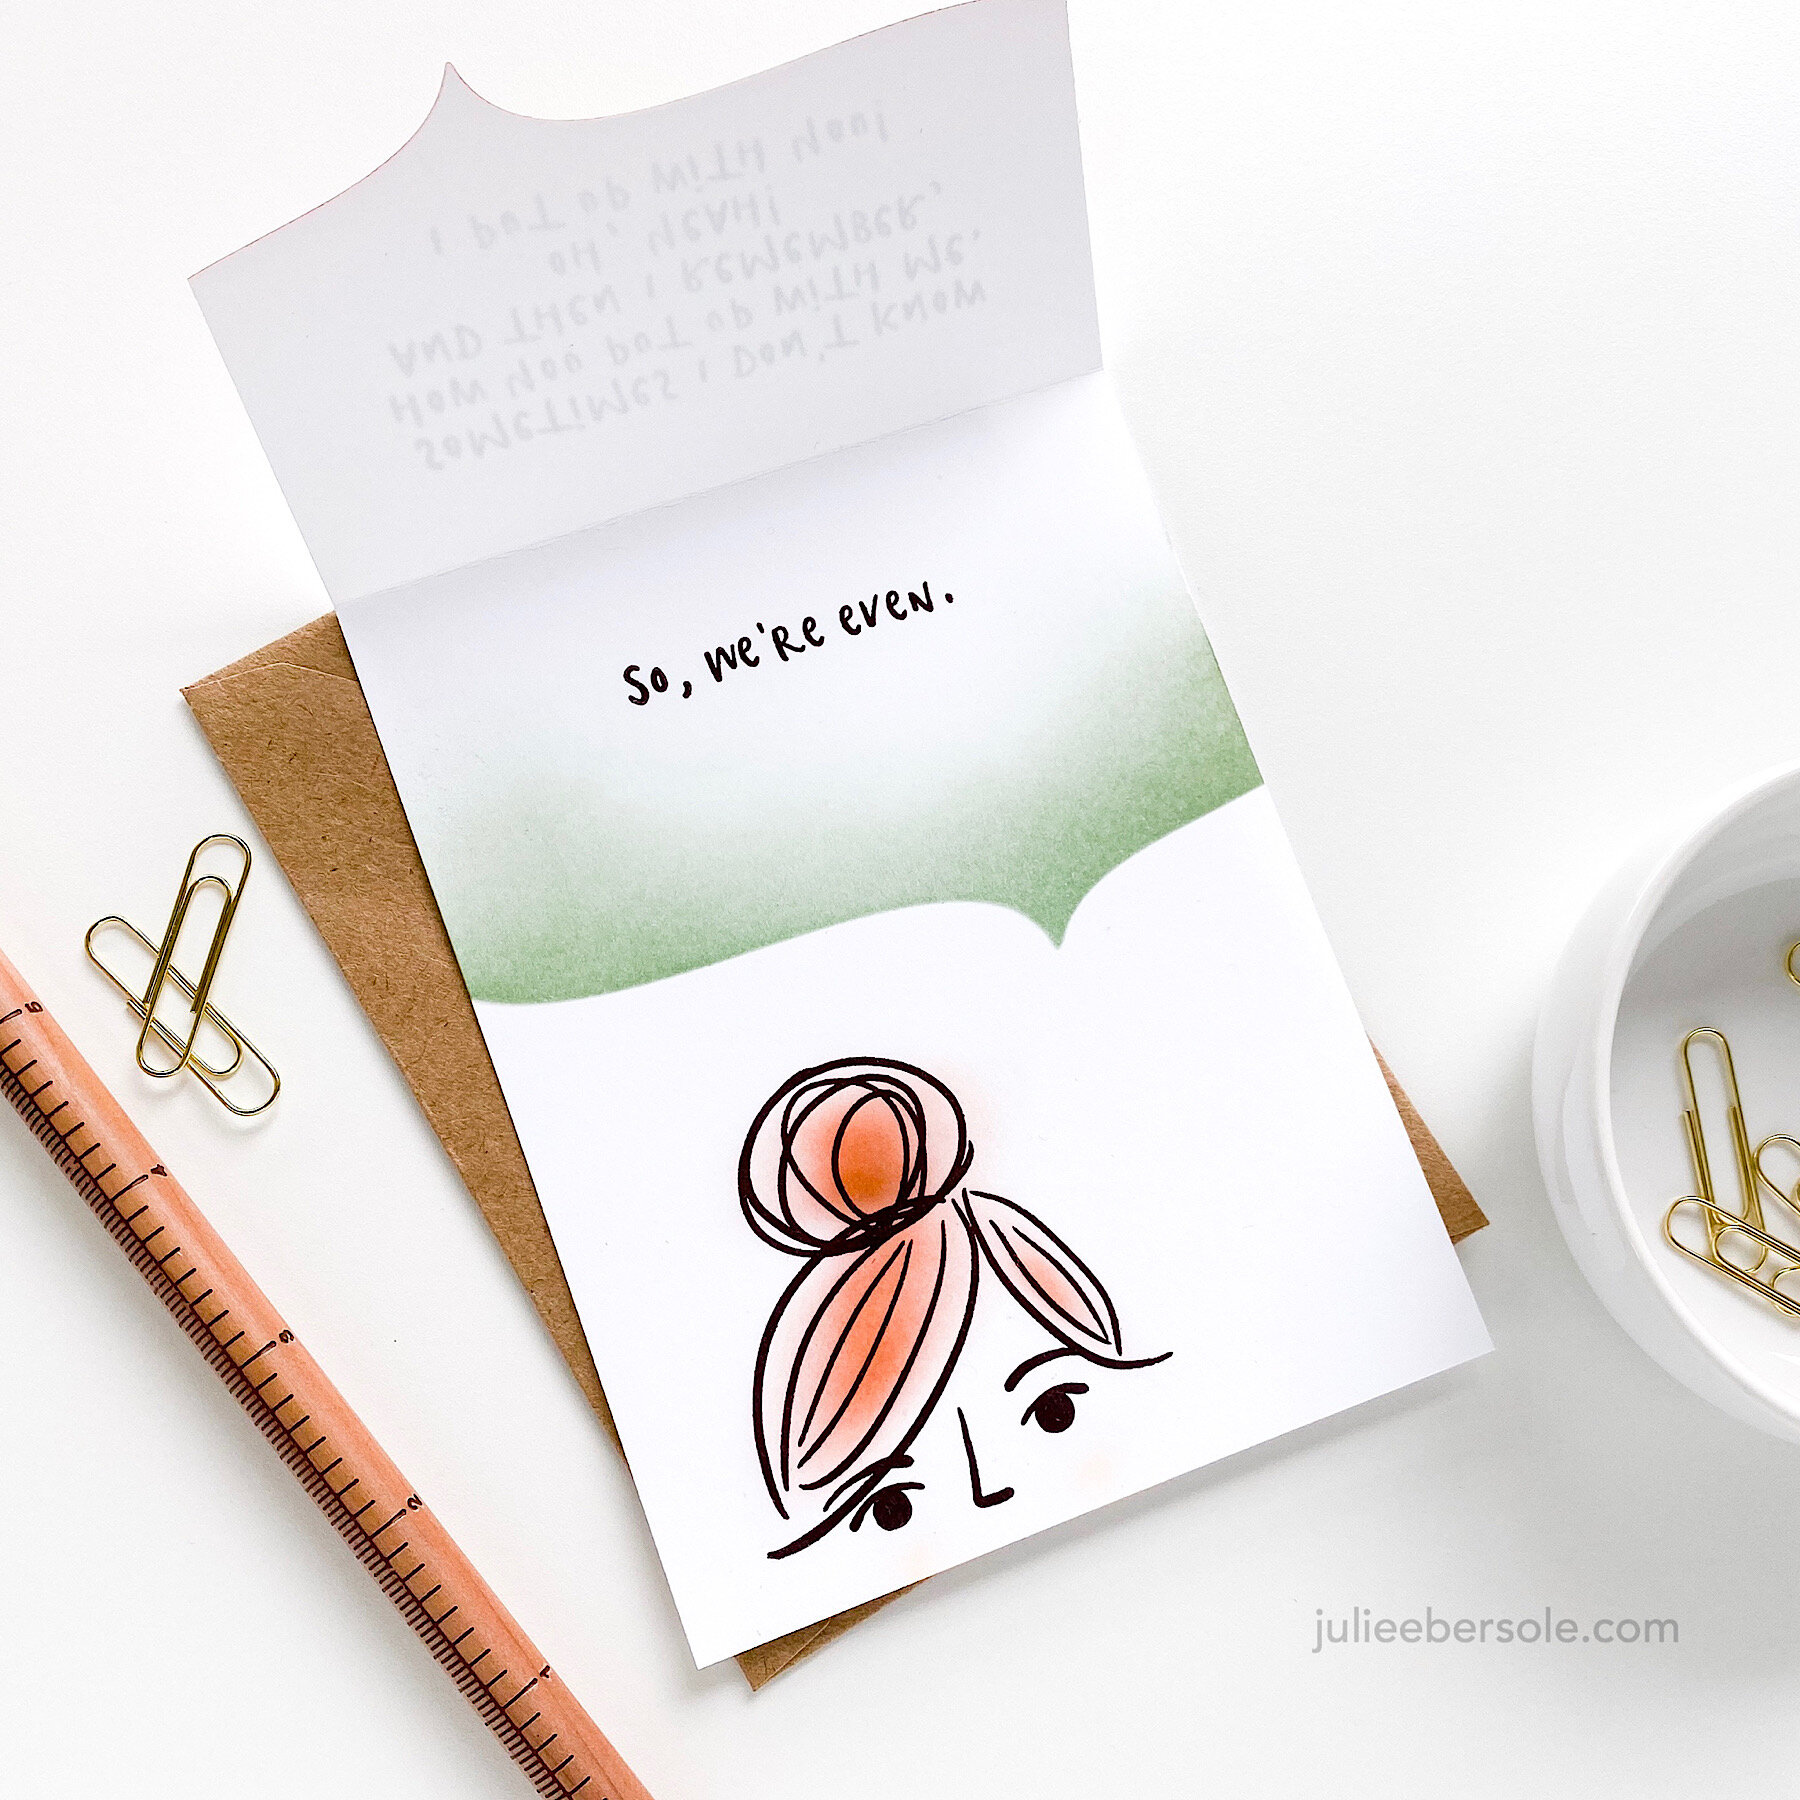 LEARN THE BASICS ABOUT STAMPING INK — JULIE EBERSOLE